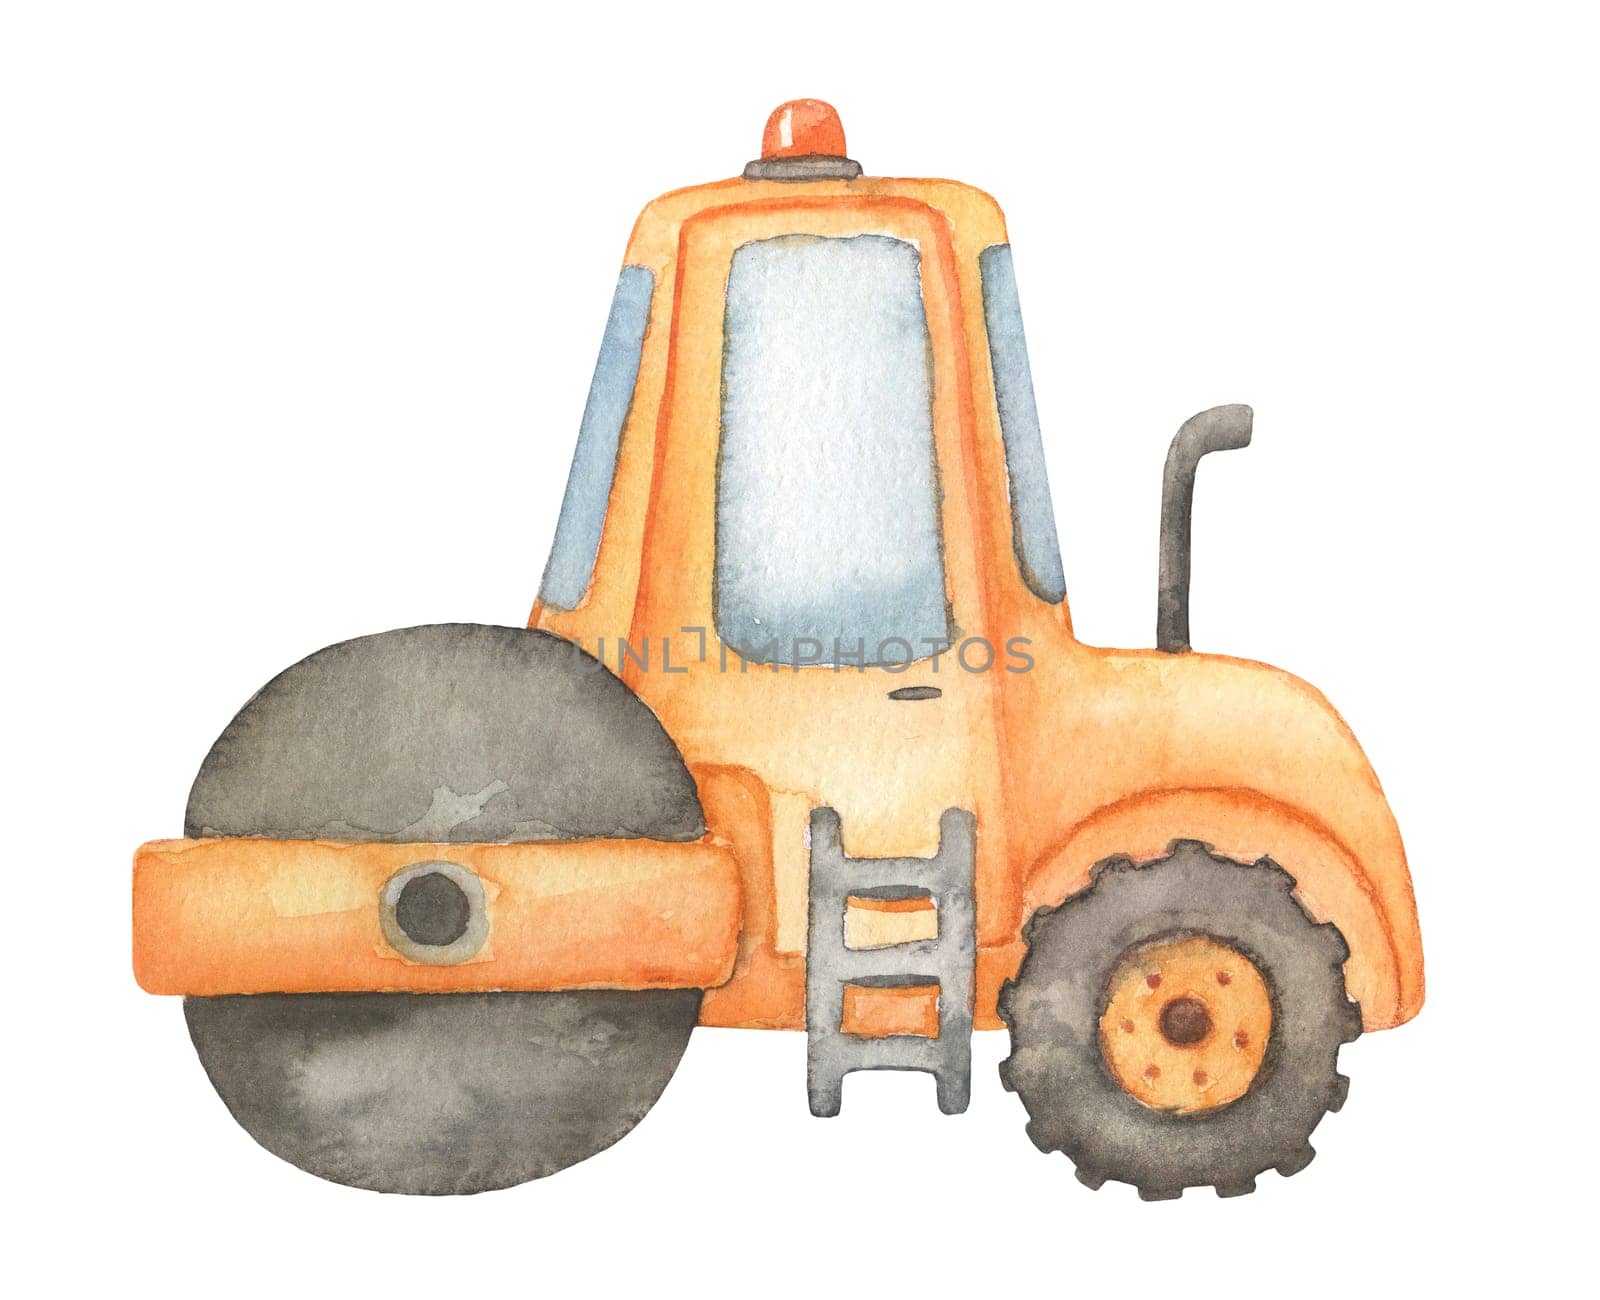 Construction road roller. Watercolor illustration isolated on white. Childish construction vehicle